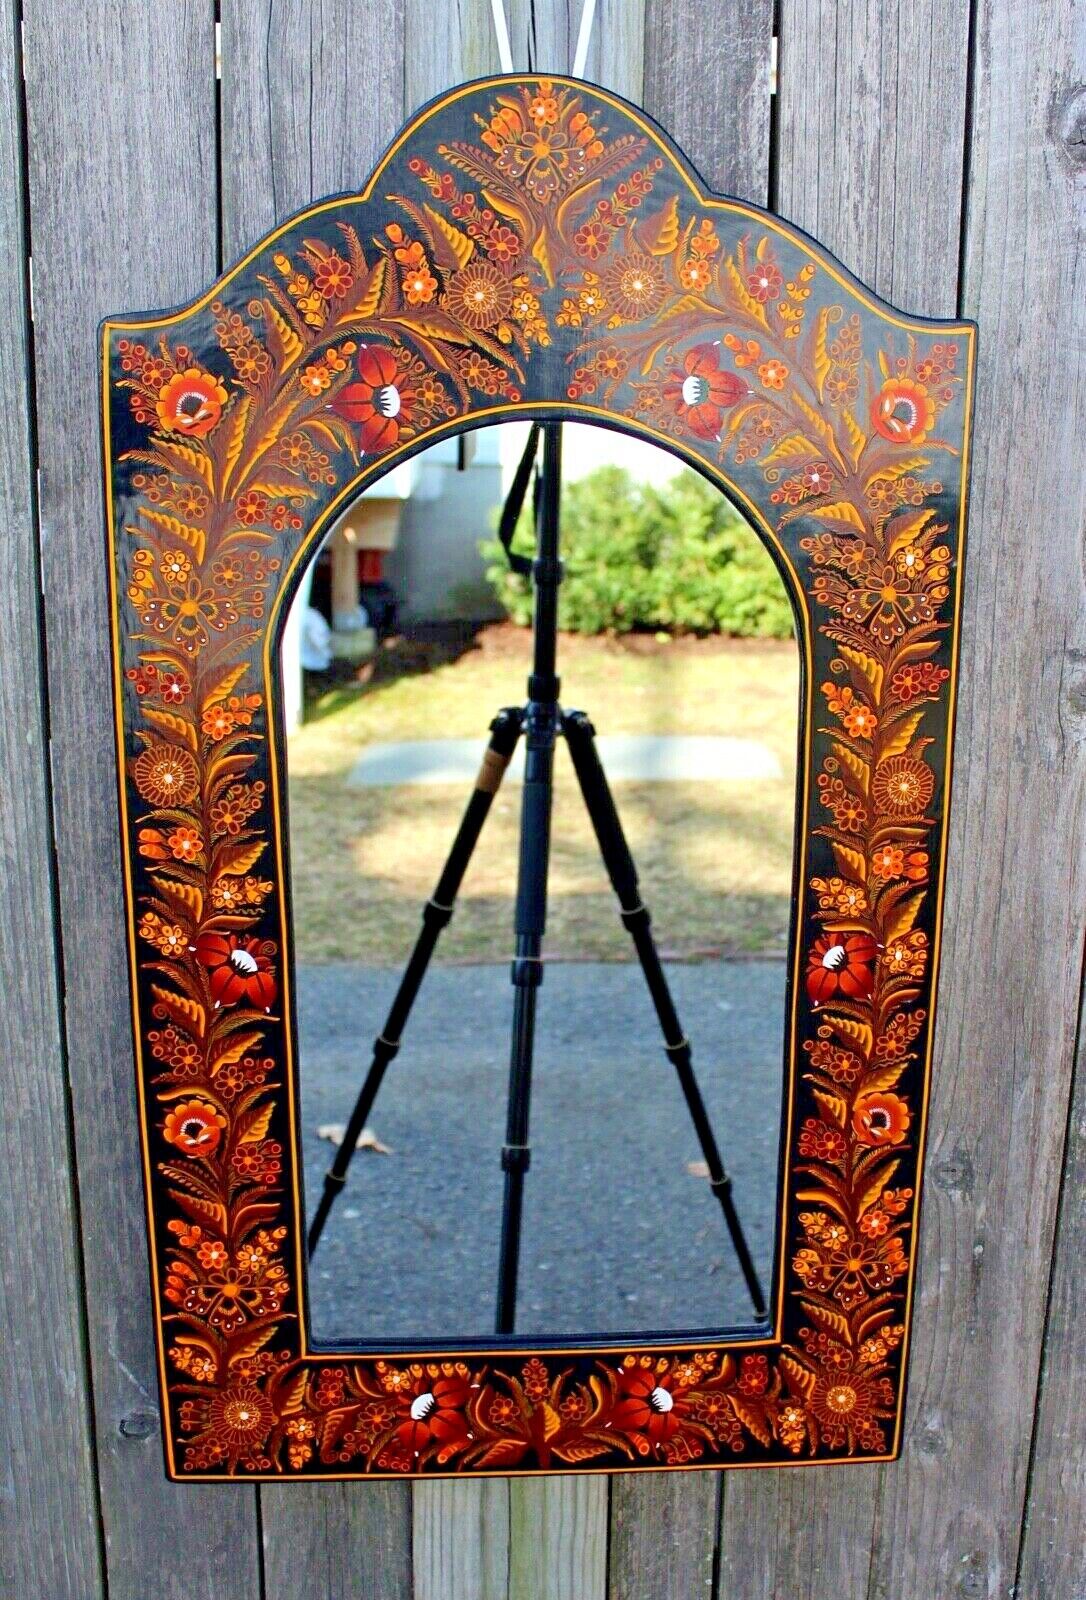 Black & Gold Lacquer Mirror Hand Painted Floral Handmade Olinalá Mexico Folk Art